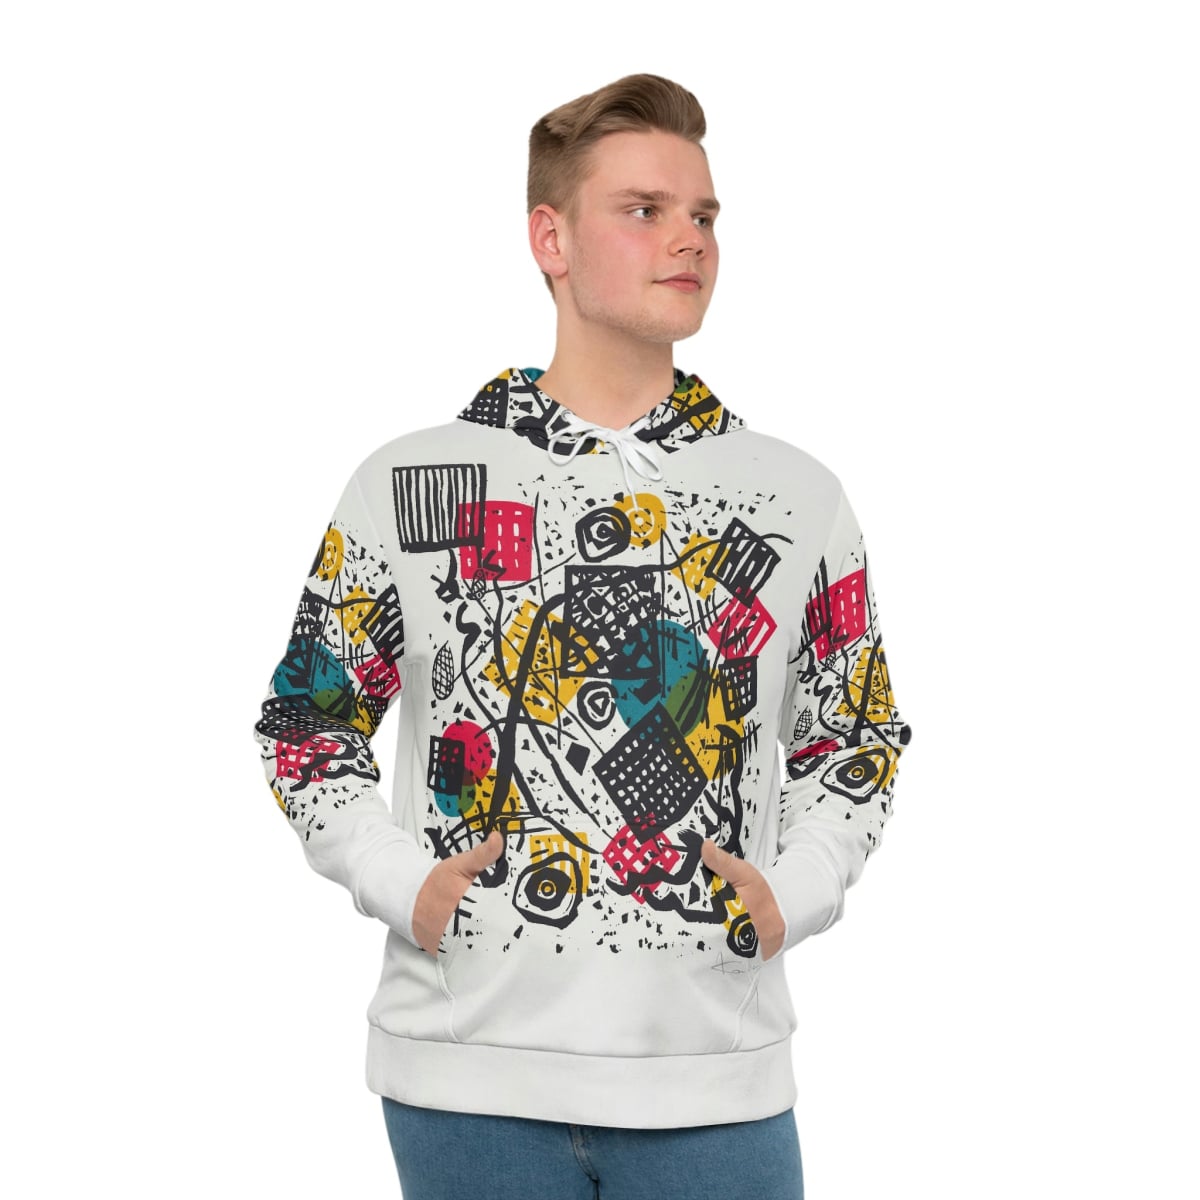 Small Worlds V by Wassily Kandinsky Hoodie